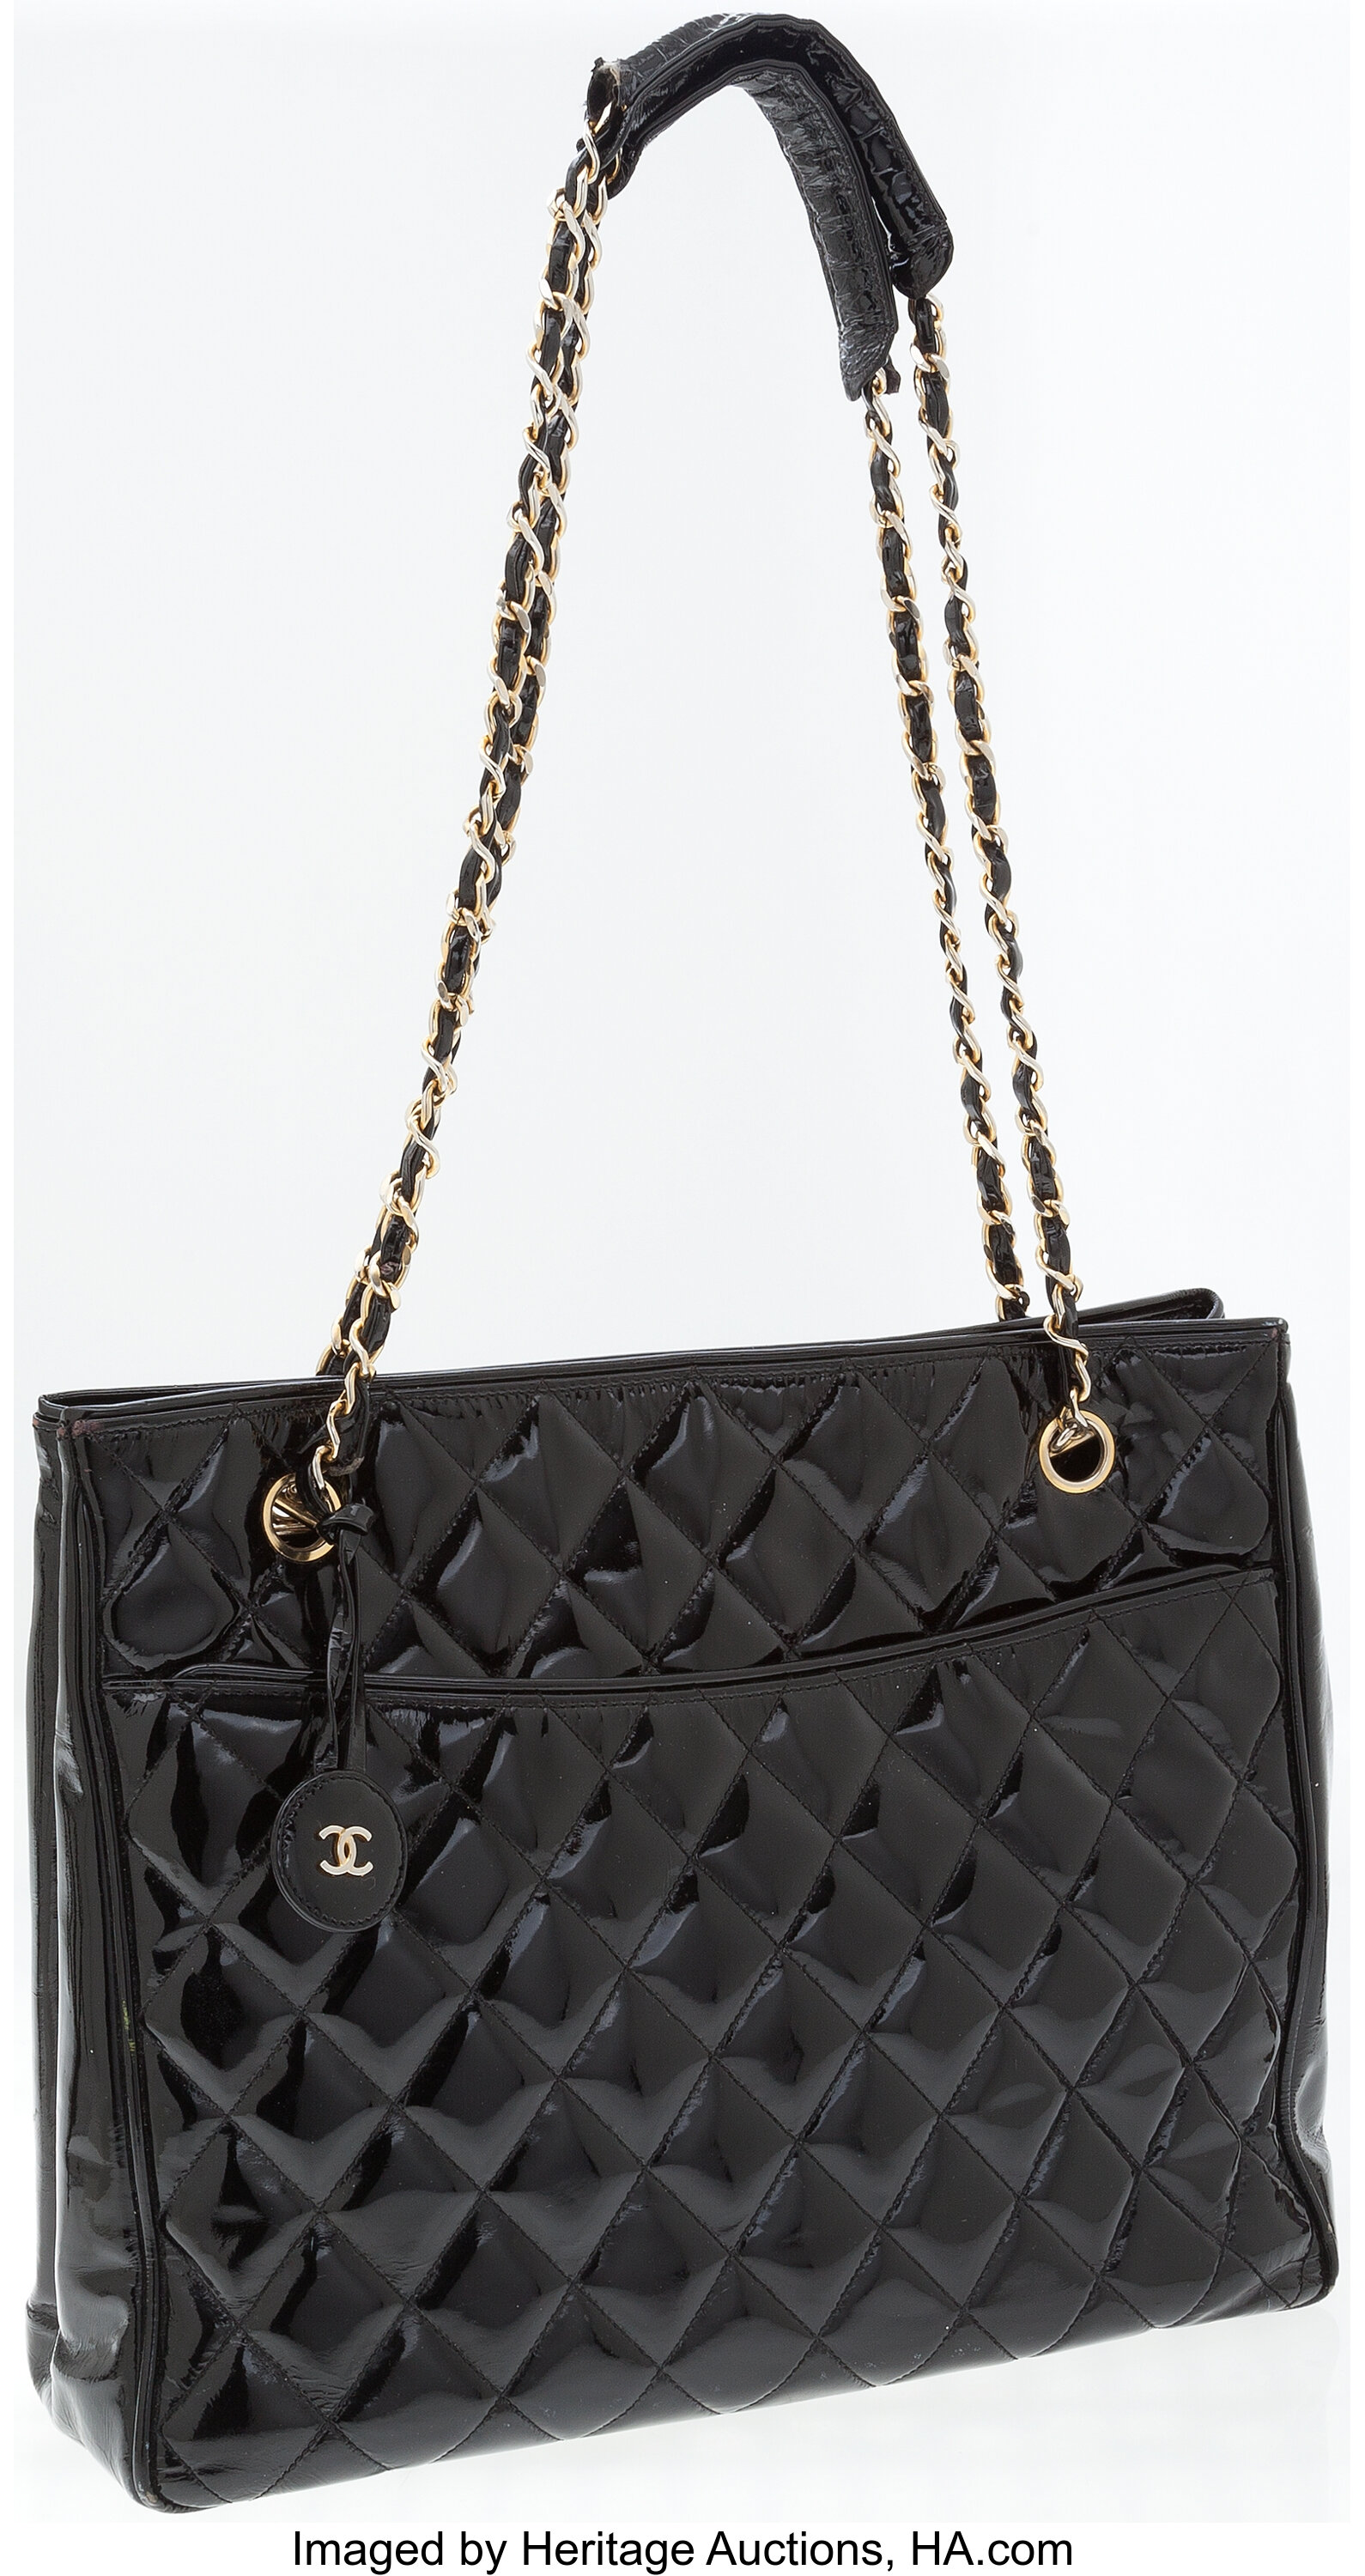 Chanel Black Quilted Leather Camera Bag Auction